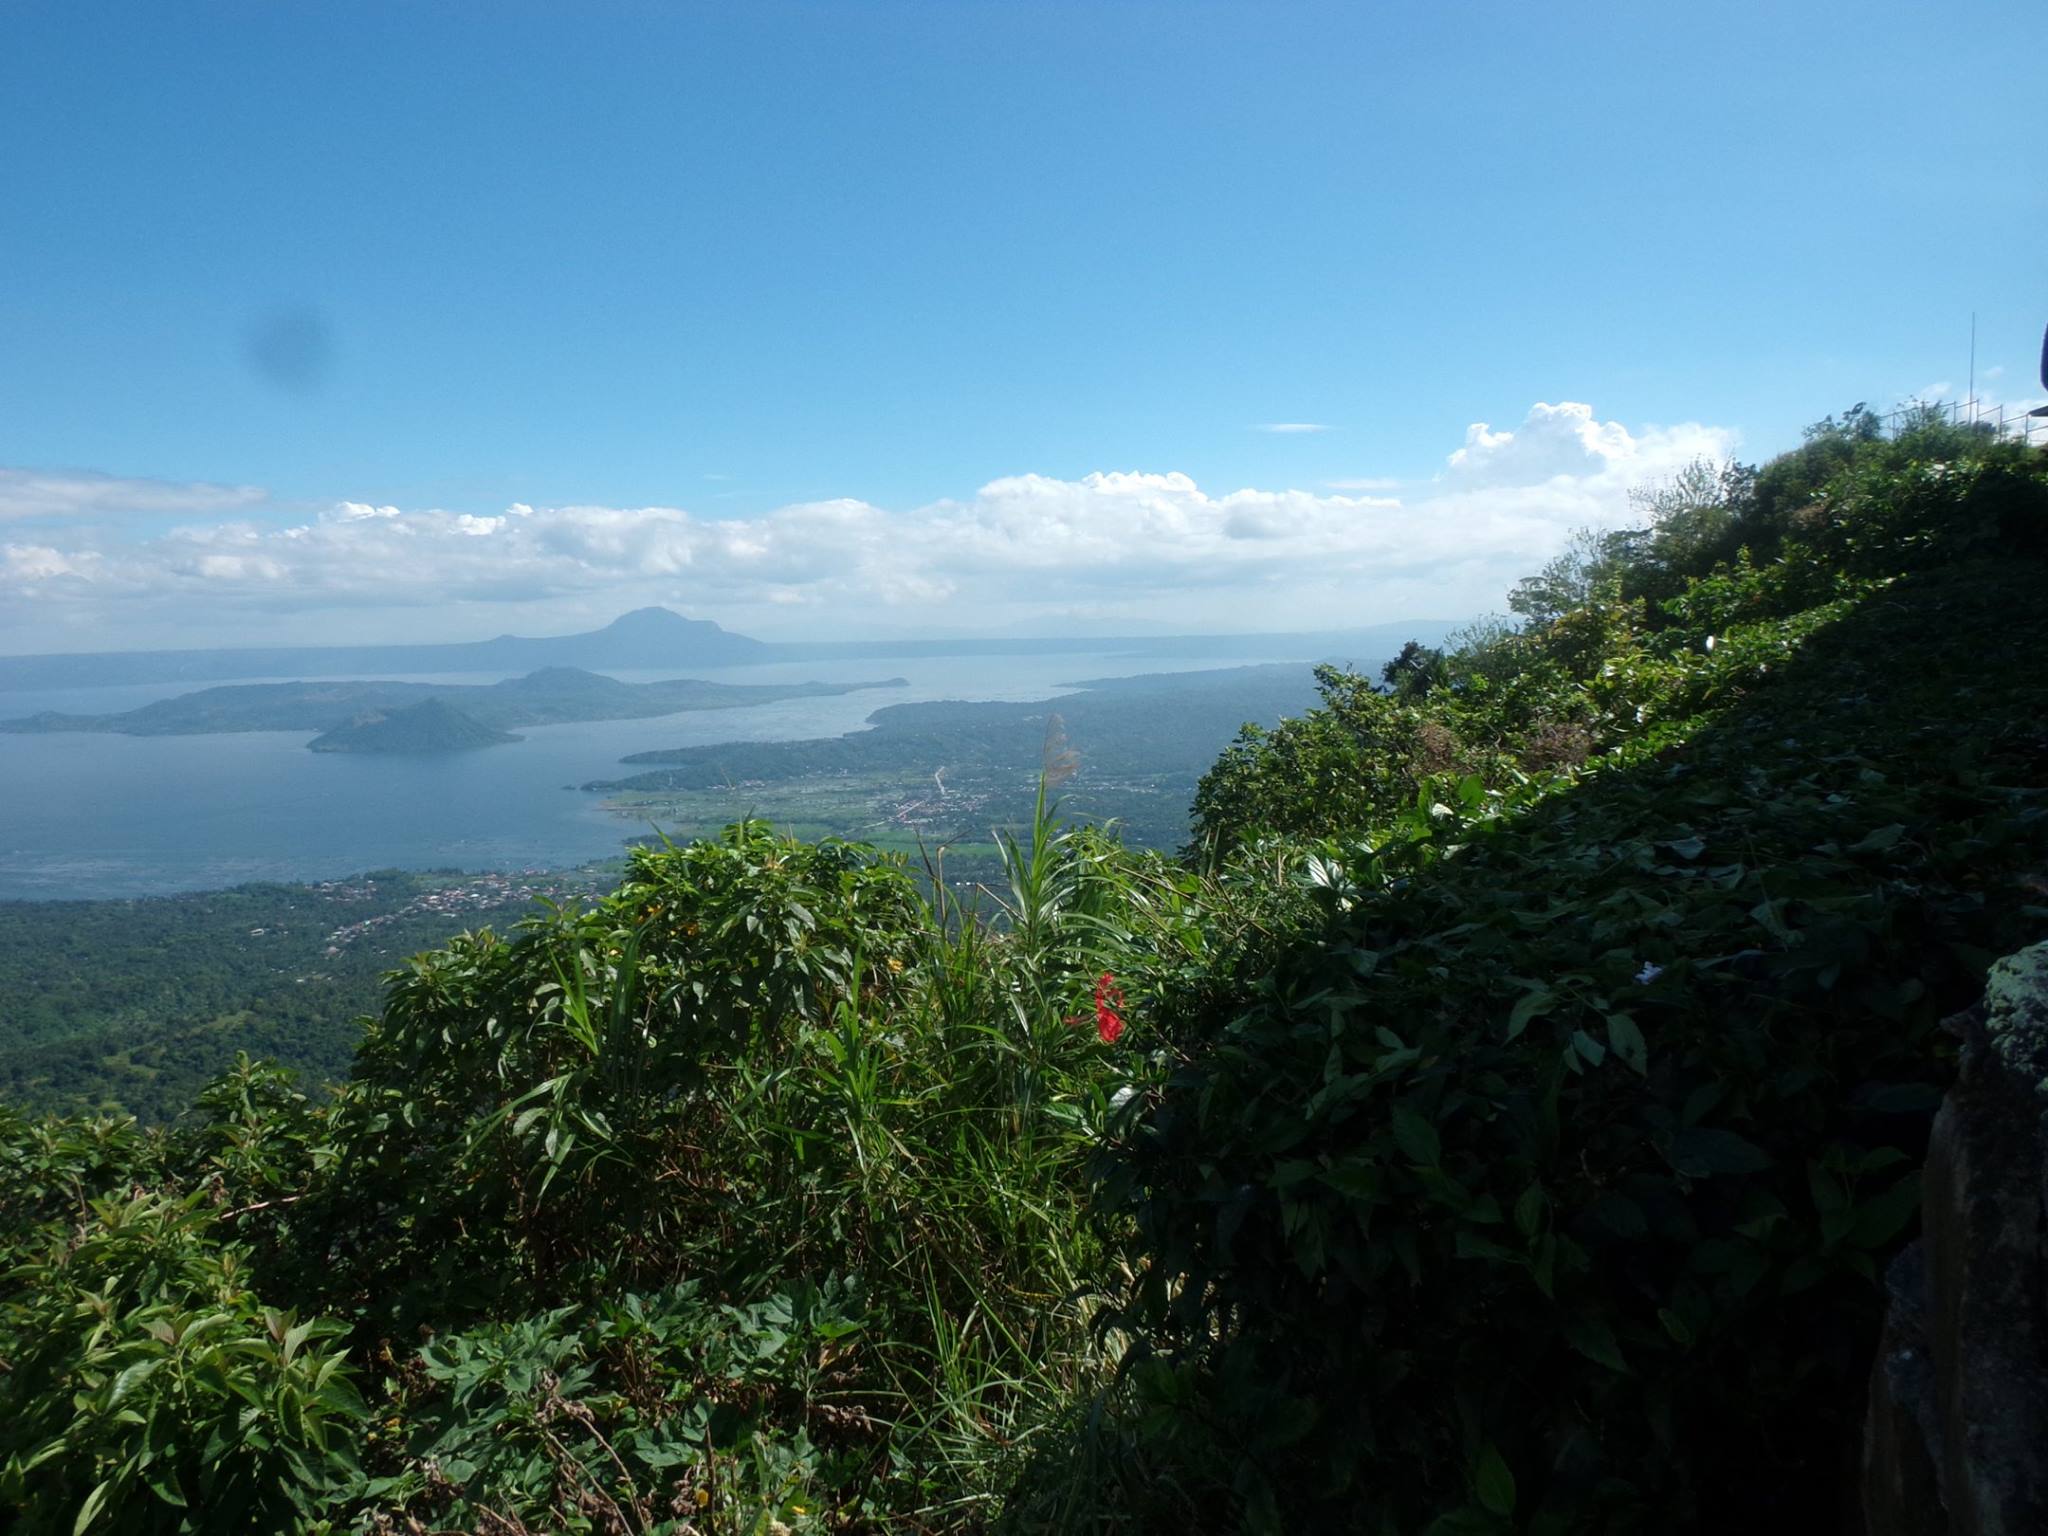 Tagaytay. The most serene place that has helped me meditate and heal after Nanay's loss.